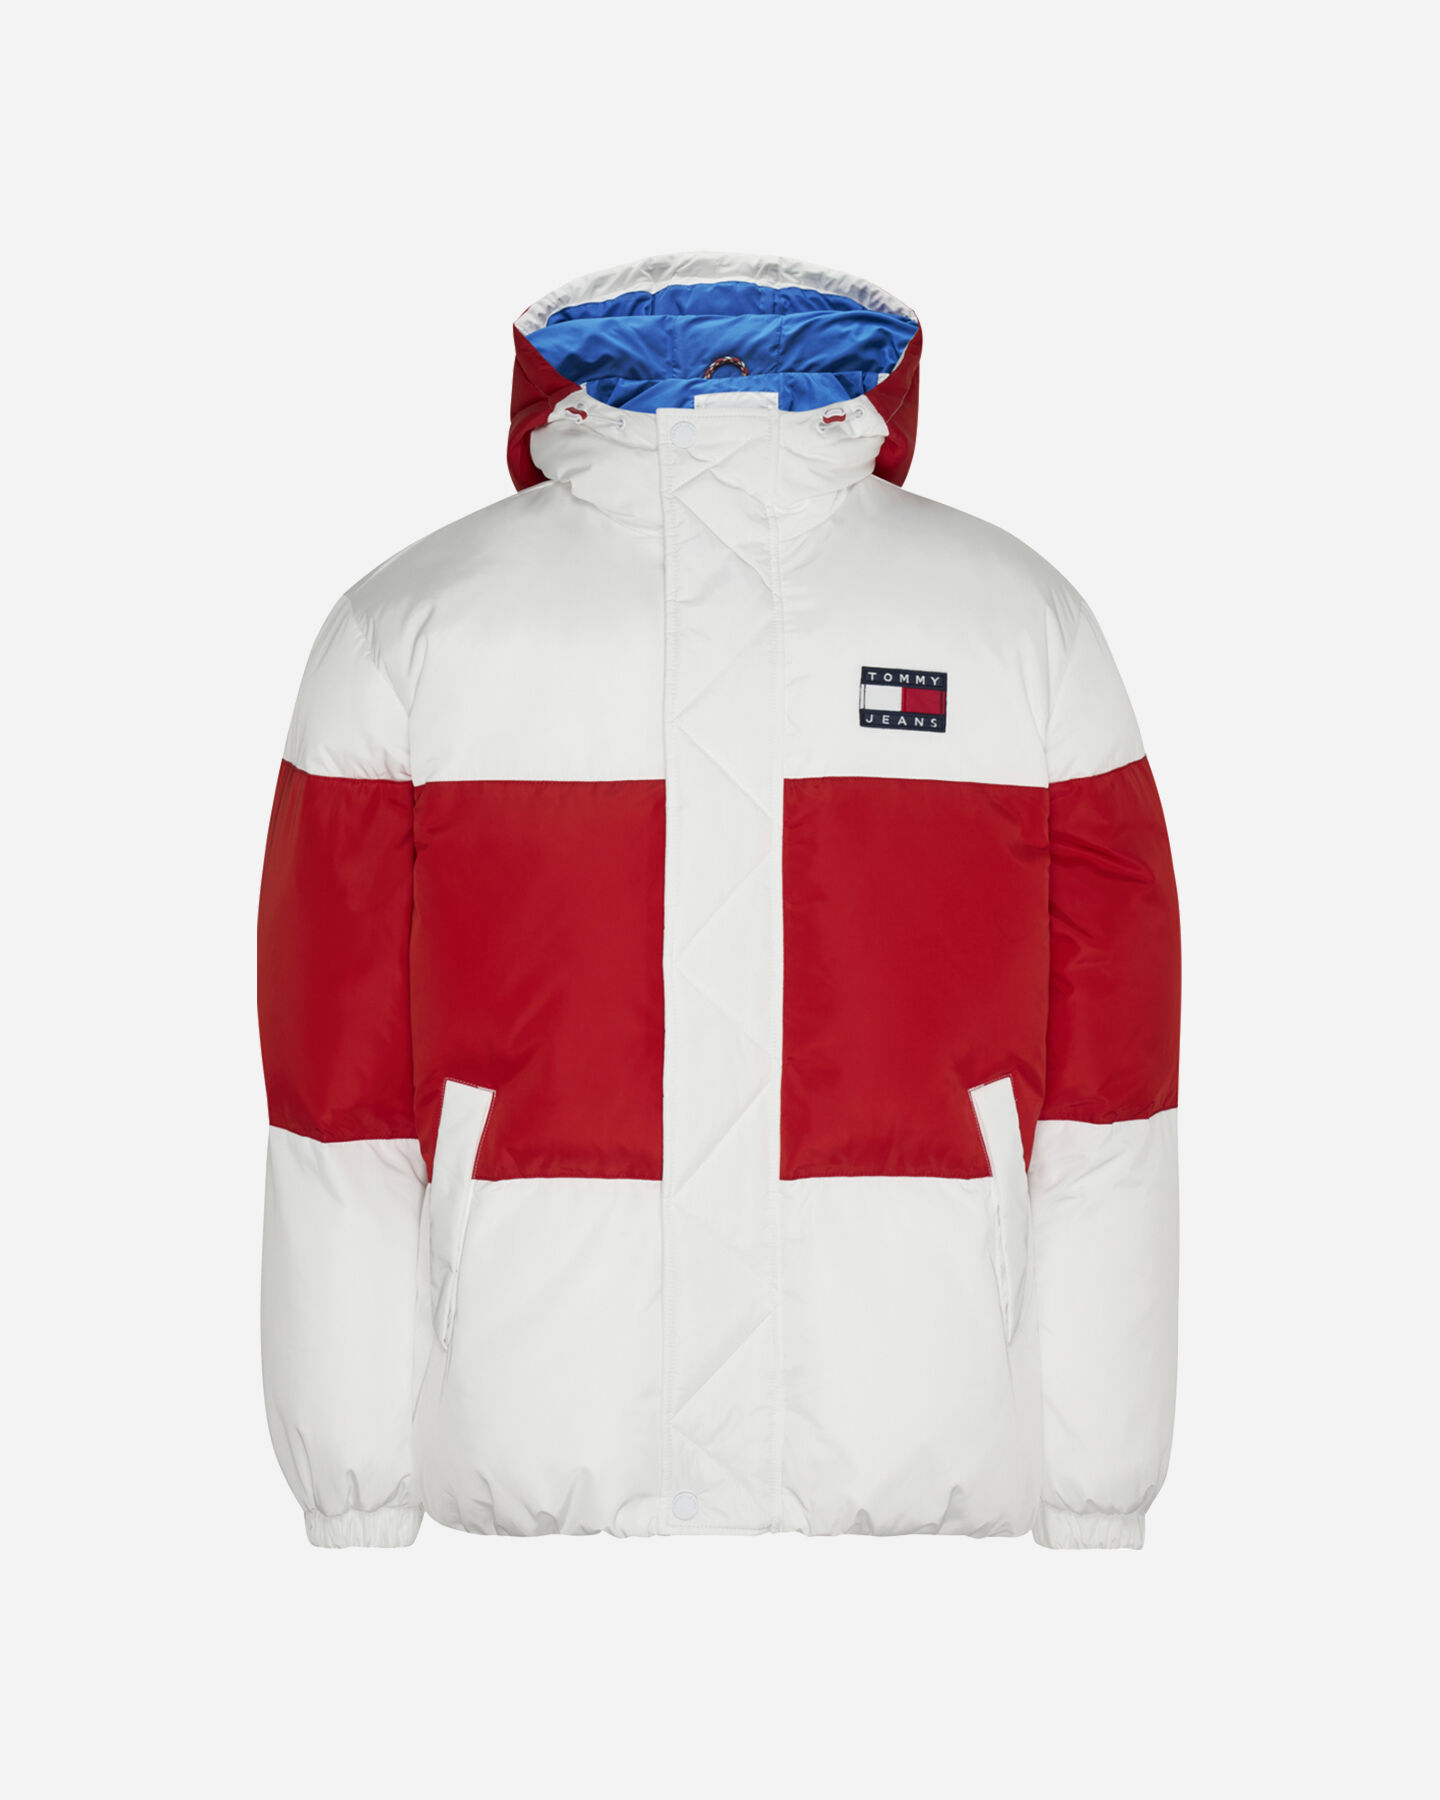  Giubbotto TOMMY HILFIGER COLOR BLOCK PUFFER M S4115258|YBR|S scatto 0